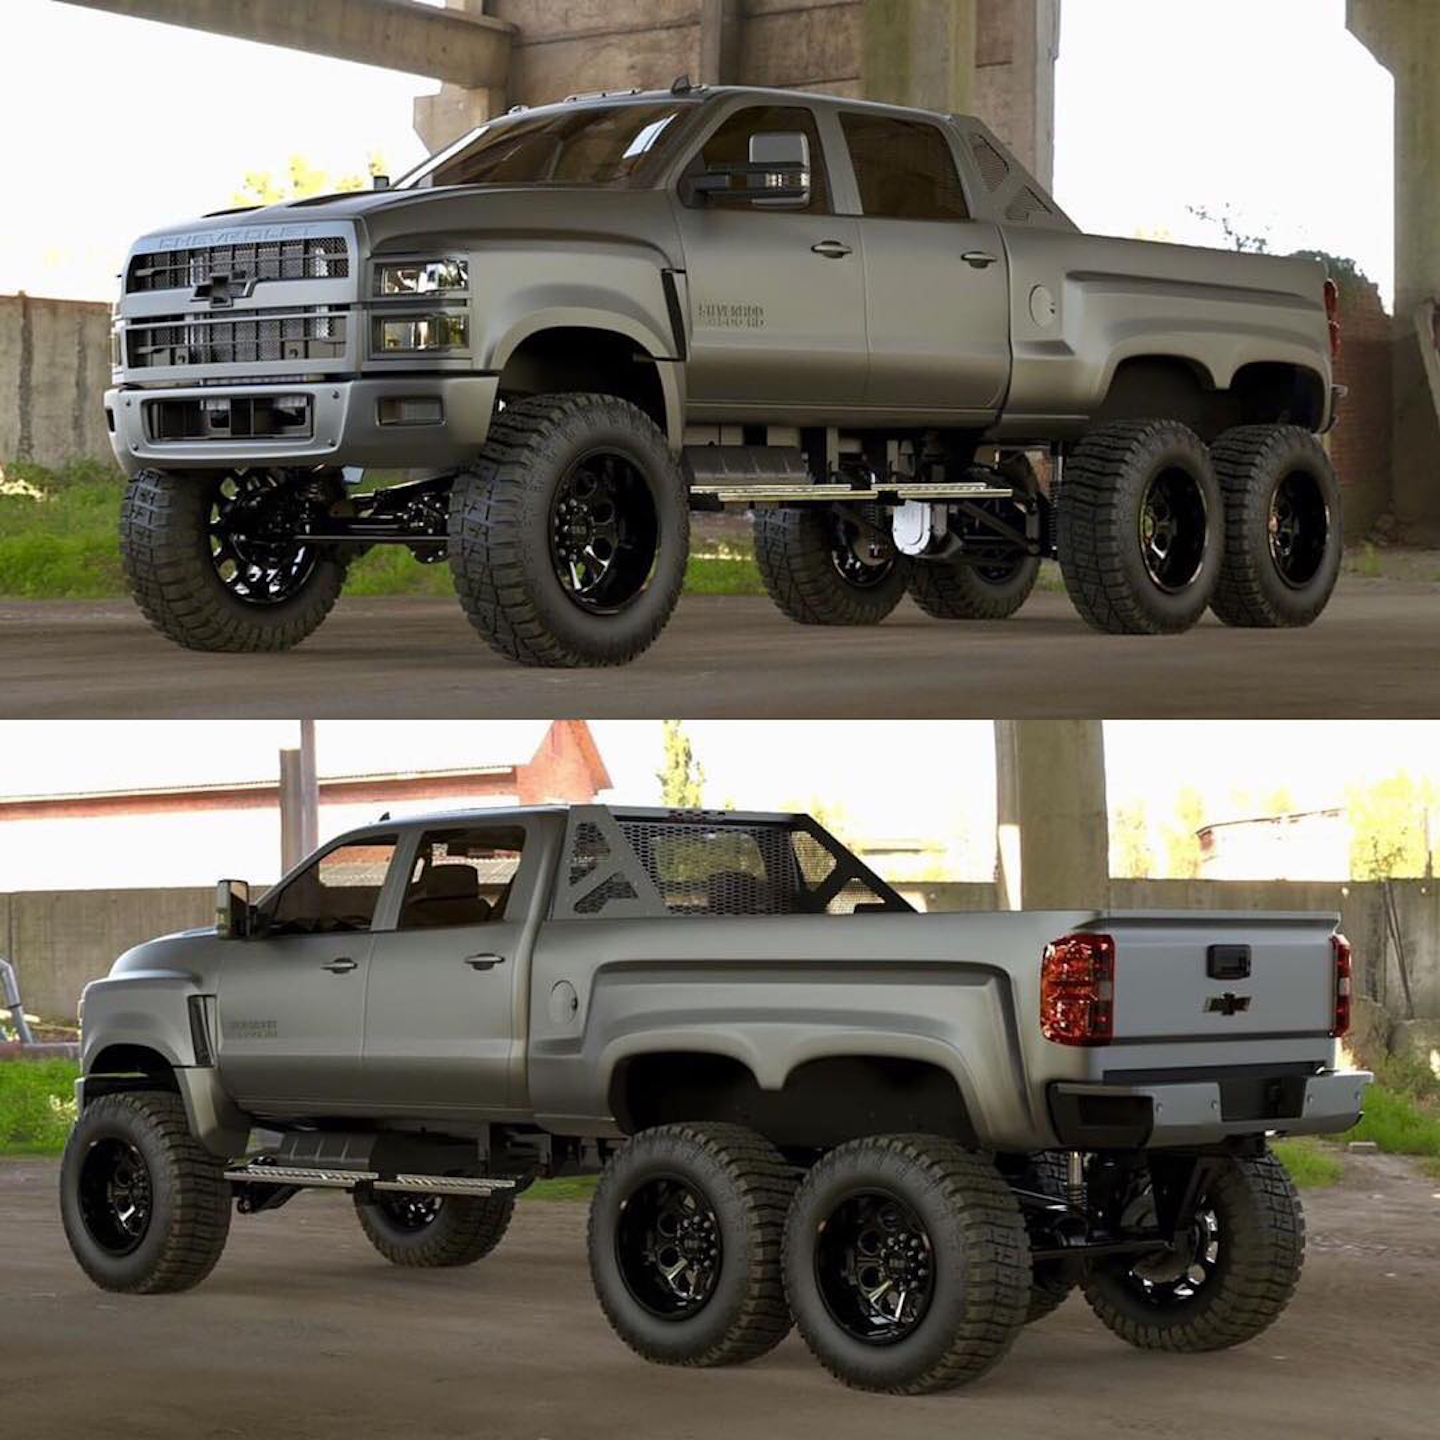 Diesel Brothers Building 6×6 Ford And Chevy Trucks Hard Working Trucks